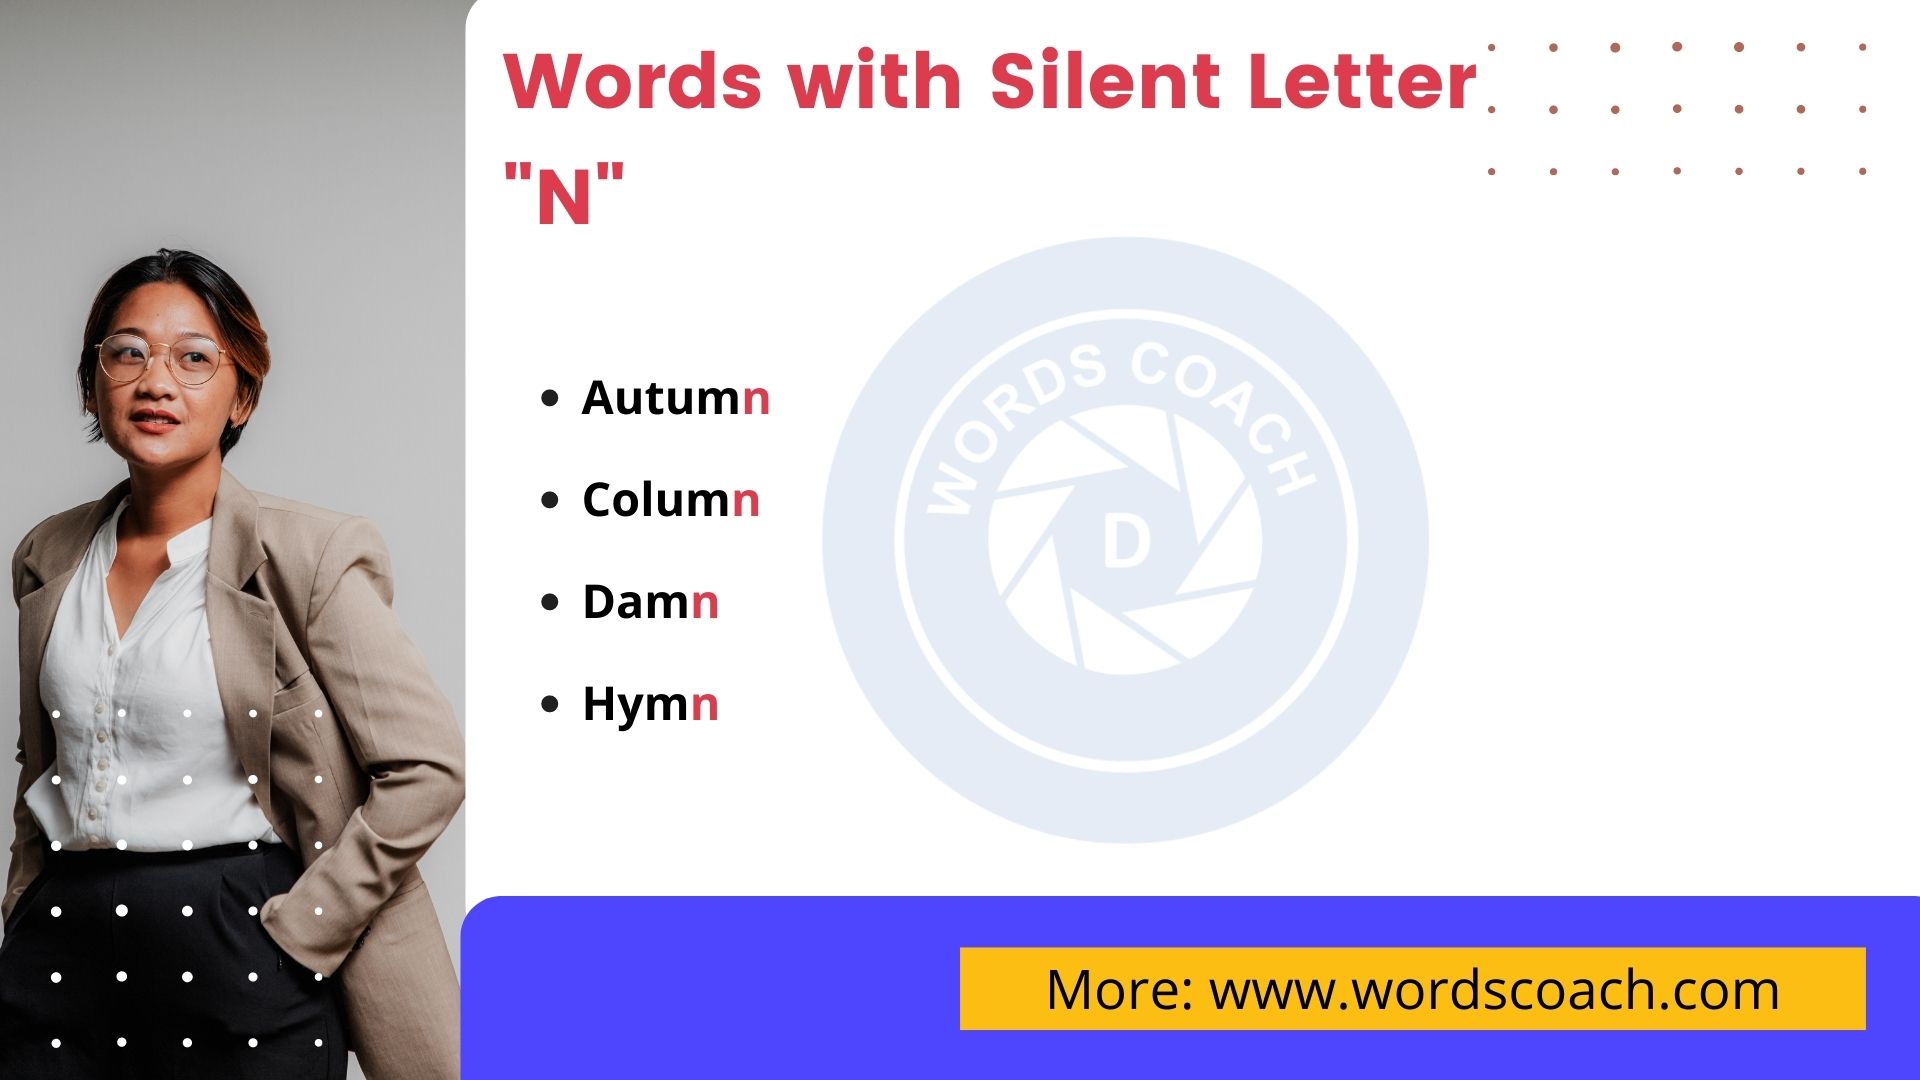 Words with Silent Letter N - wordscoach.com